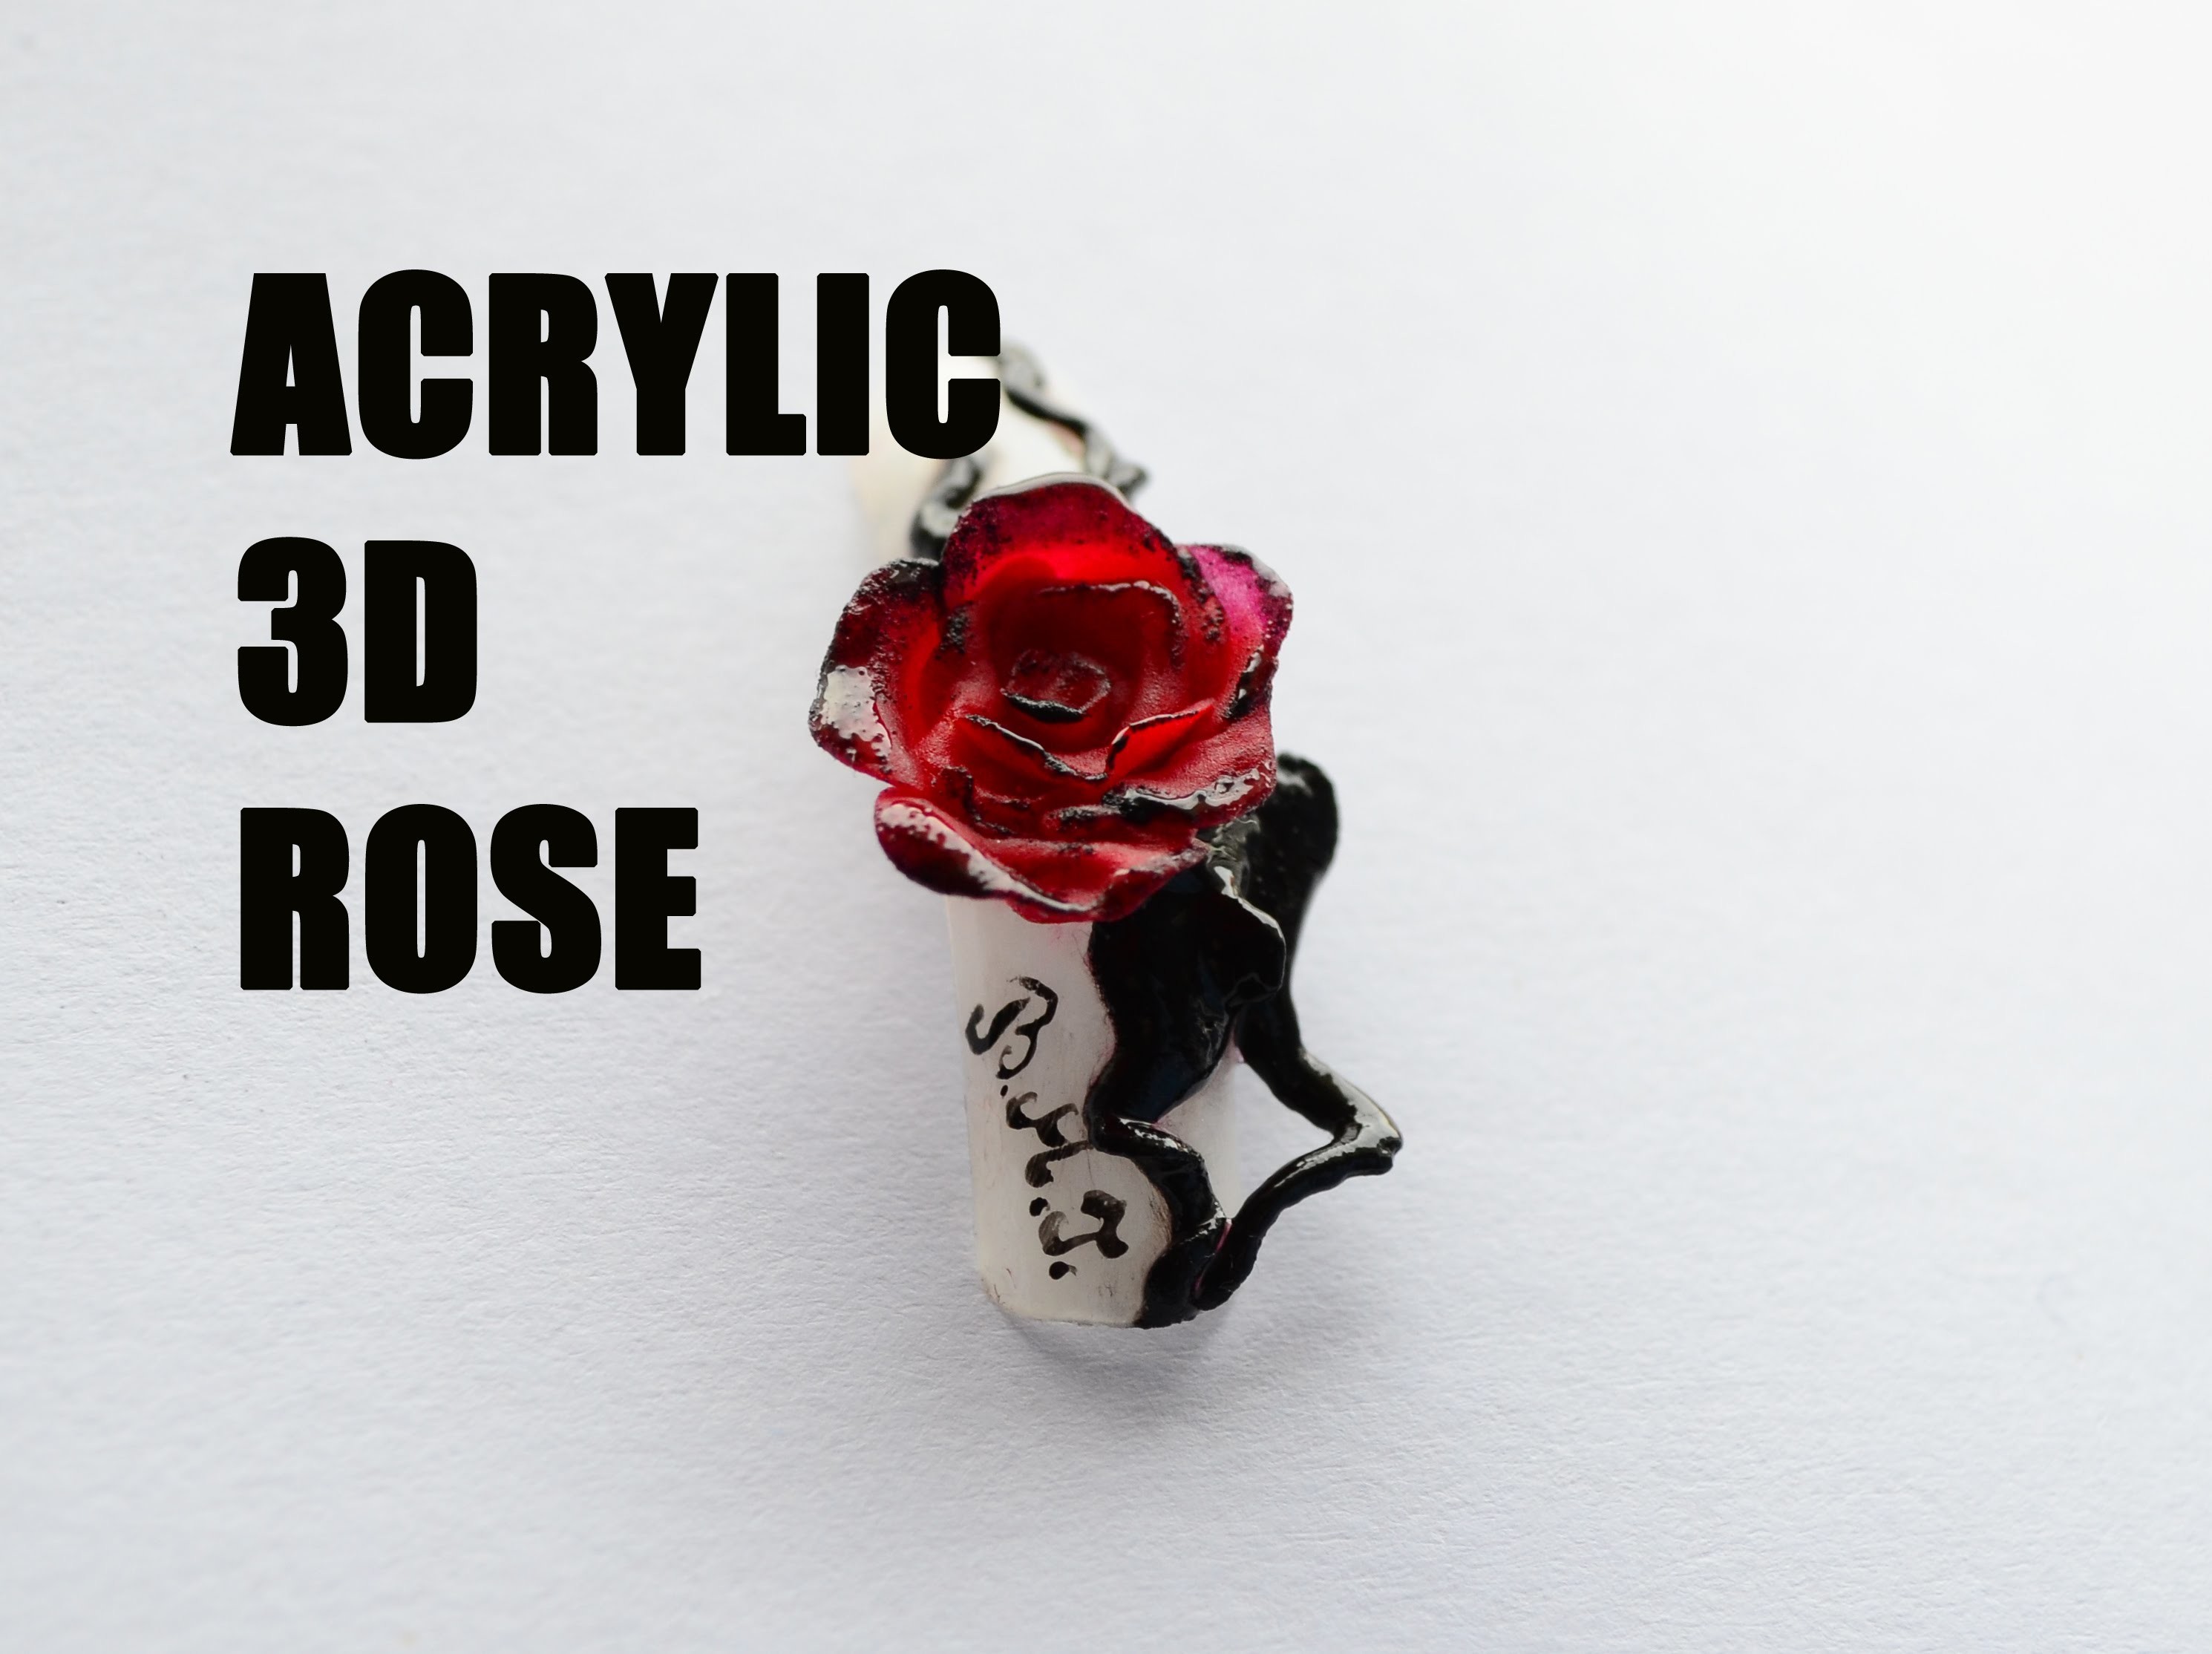 DIY Acrylic 3D rose nail art by BMTNAILS. How to make an acrylic rose